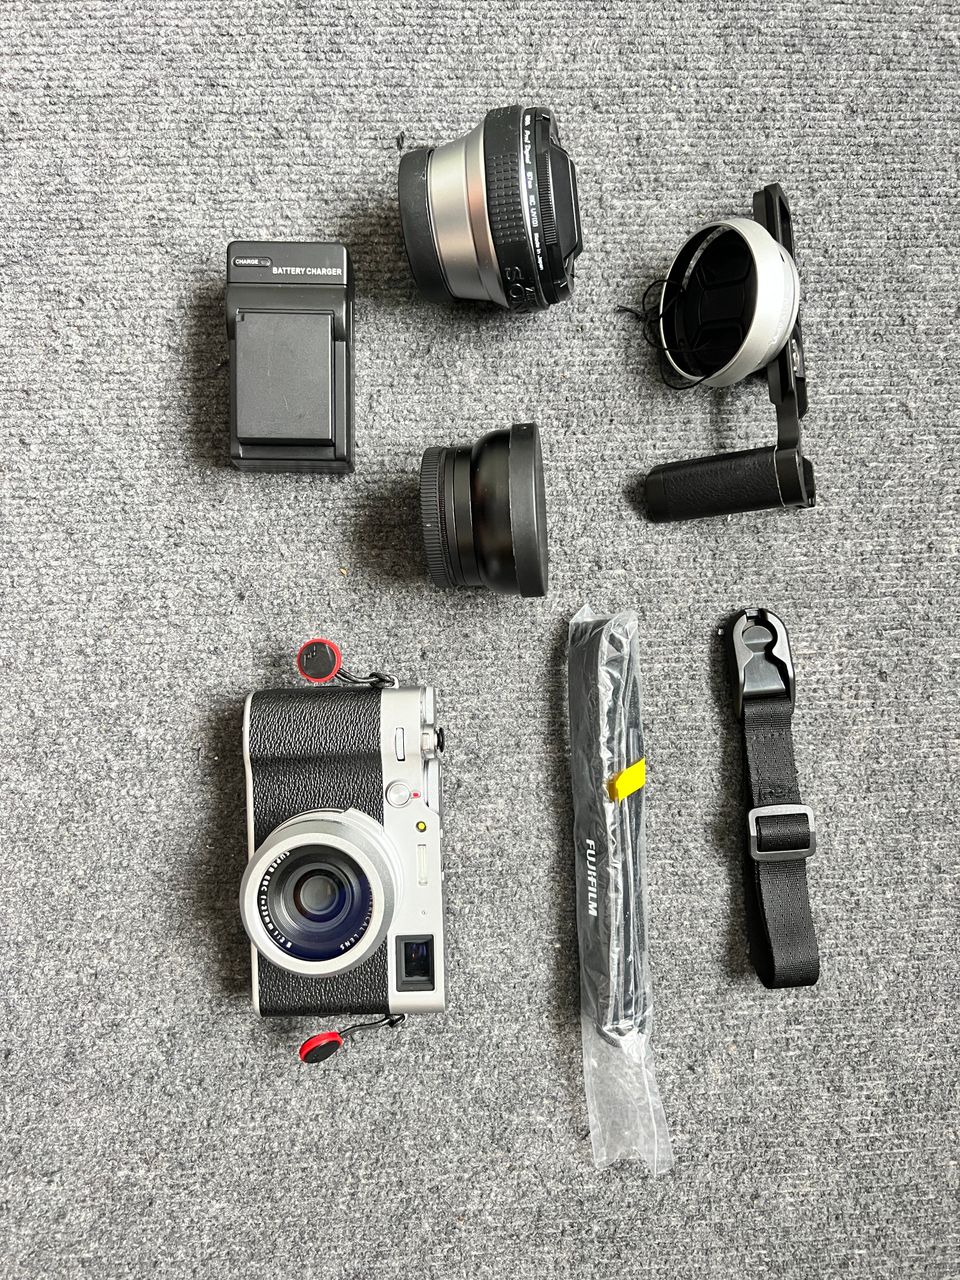 x100v camera with tcl and many accessories